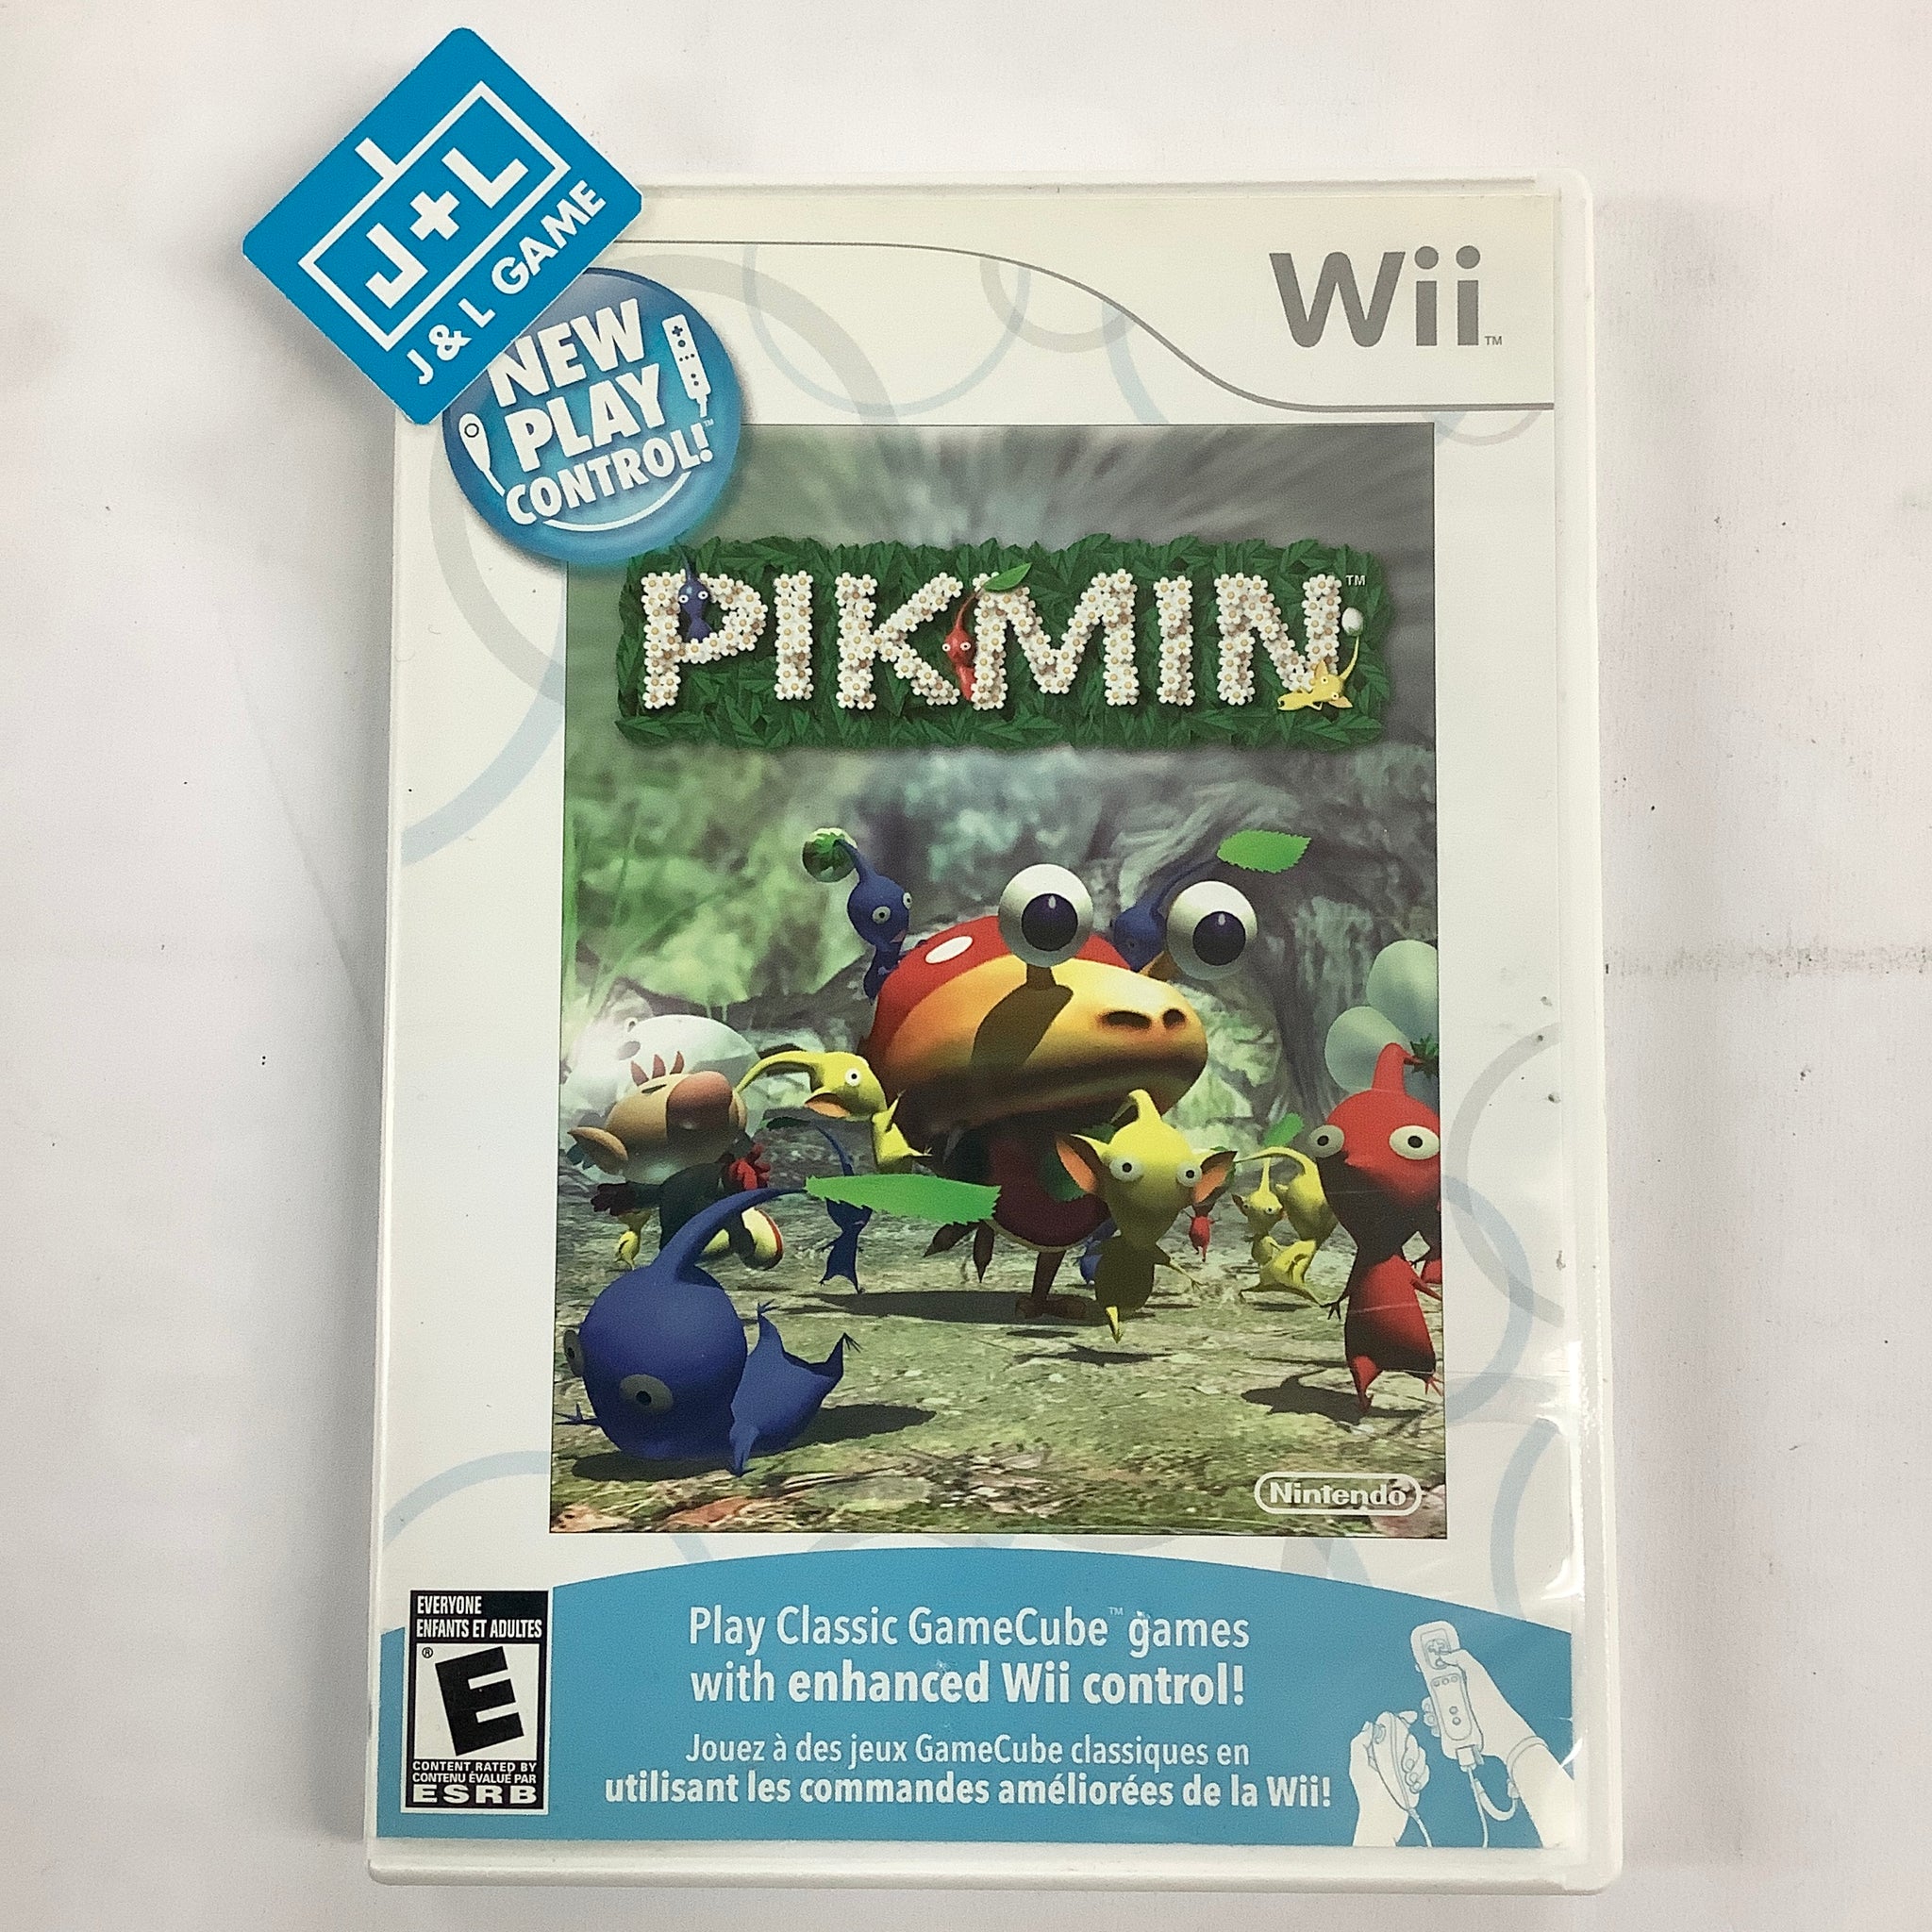 Pikmin (New Play Control!) - Nintendo Wii [Pre-Owned] Video Games Nintendo   